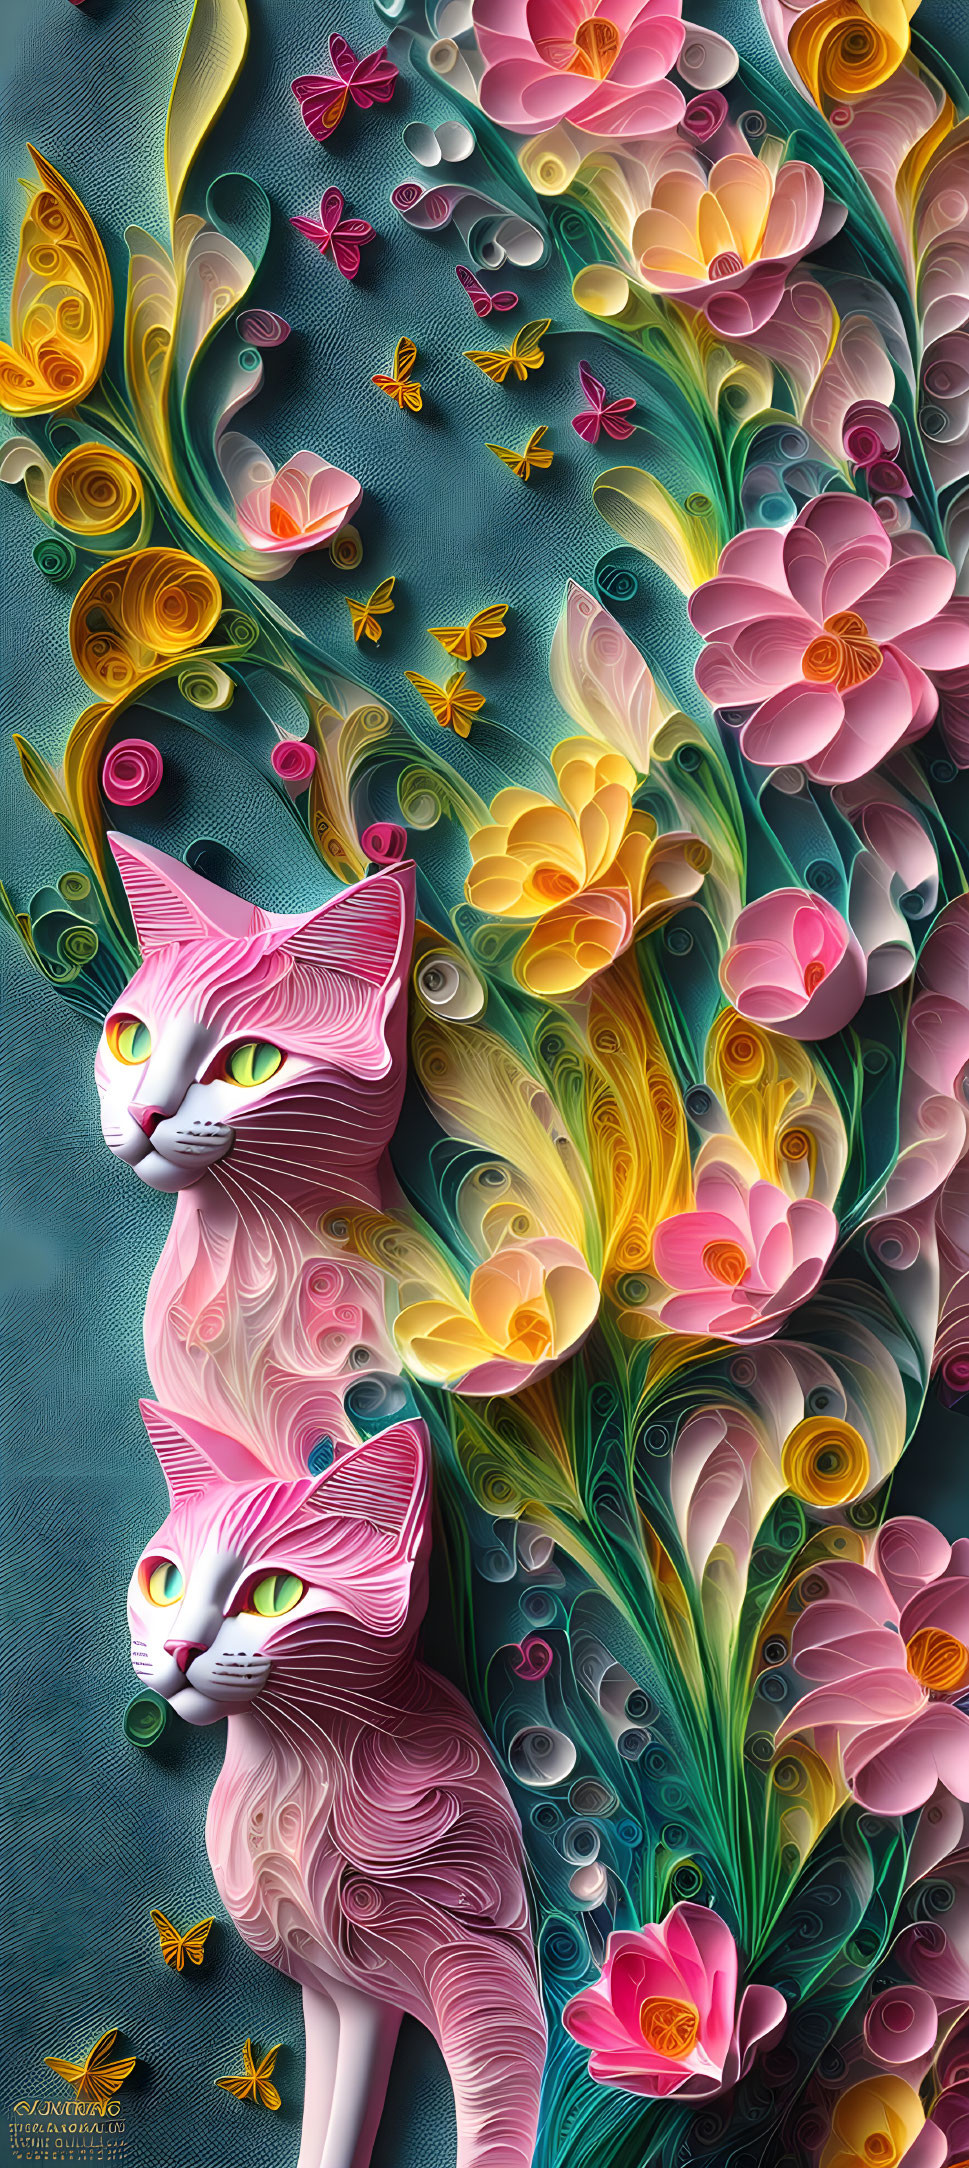 Paper Cut, quilling, photorealistic, pink cats, ye